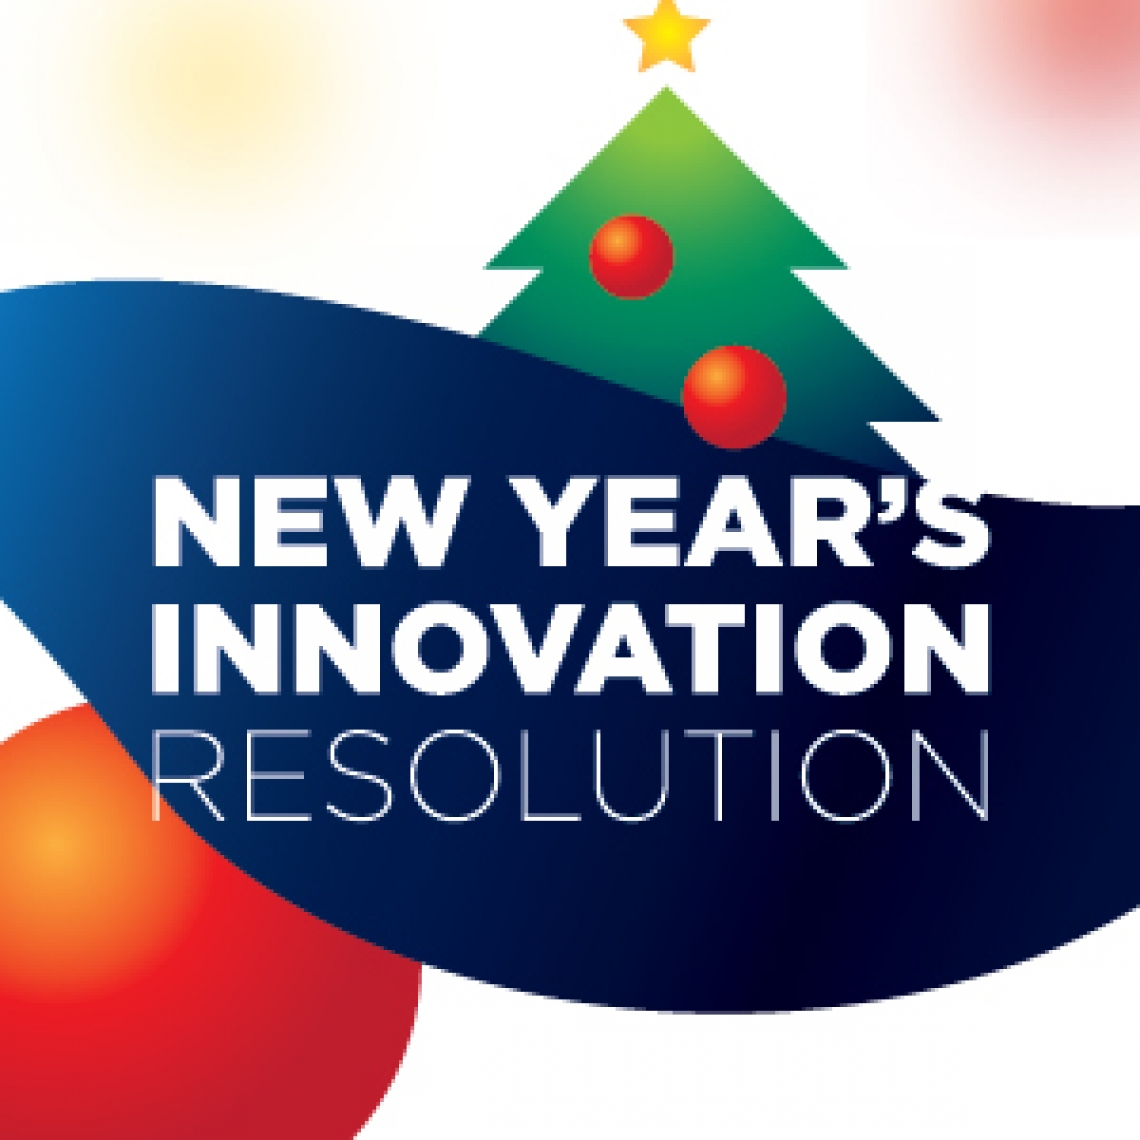 2017 New Year’s Innovation Resolutions